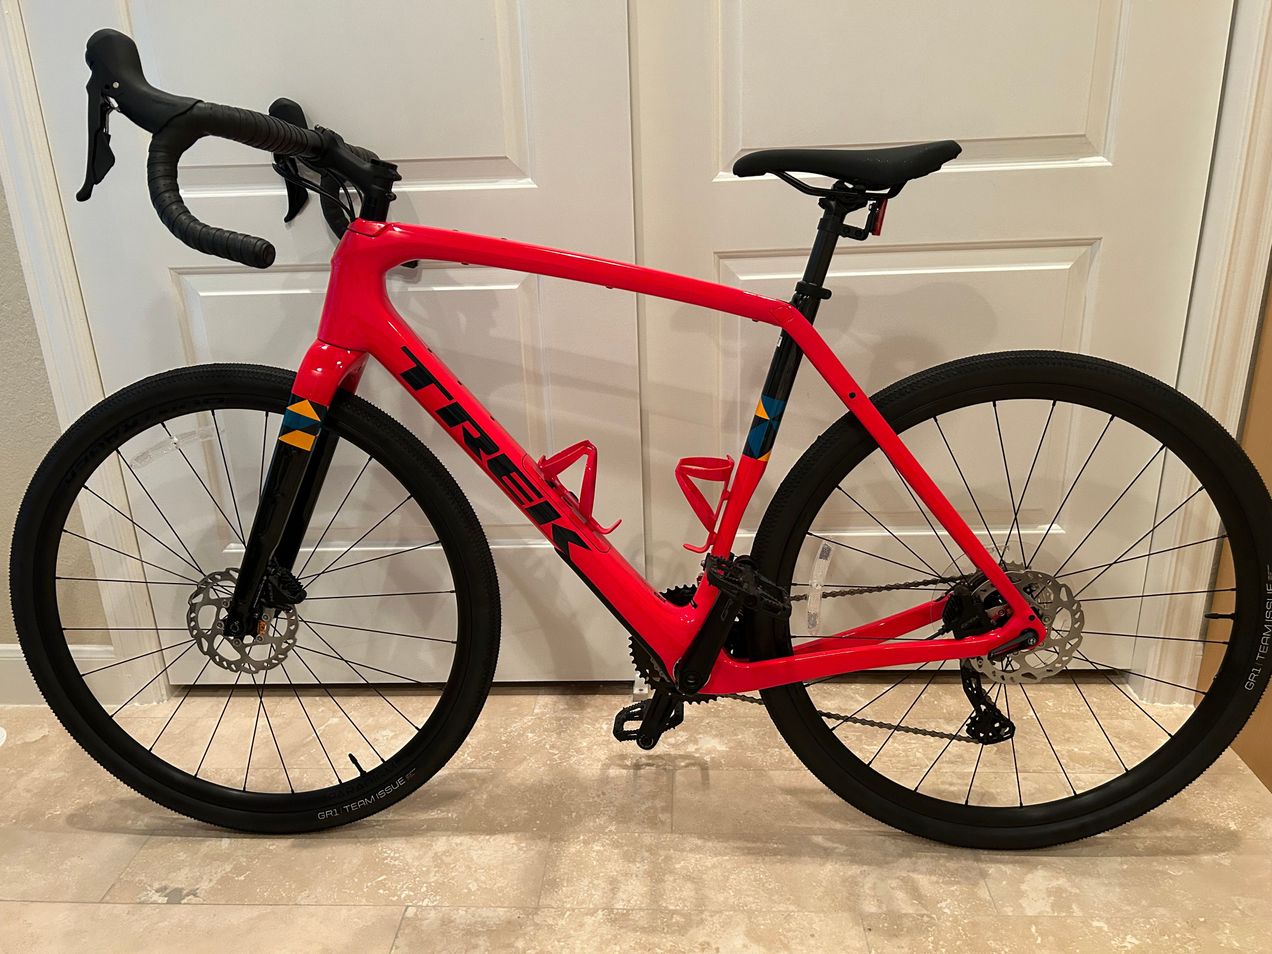 Trek Checkpoint SL 5 used in 58 cm | buycycle USA